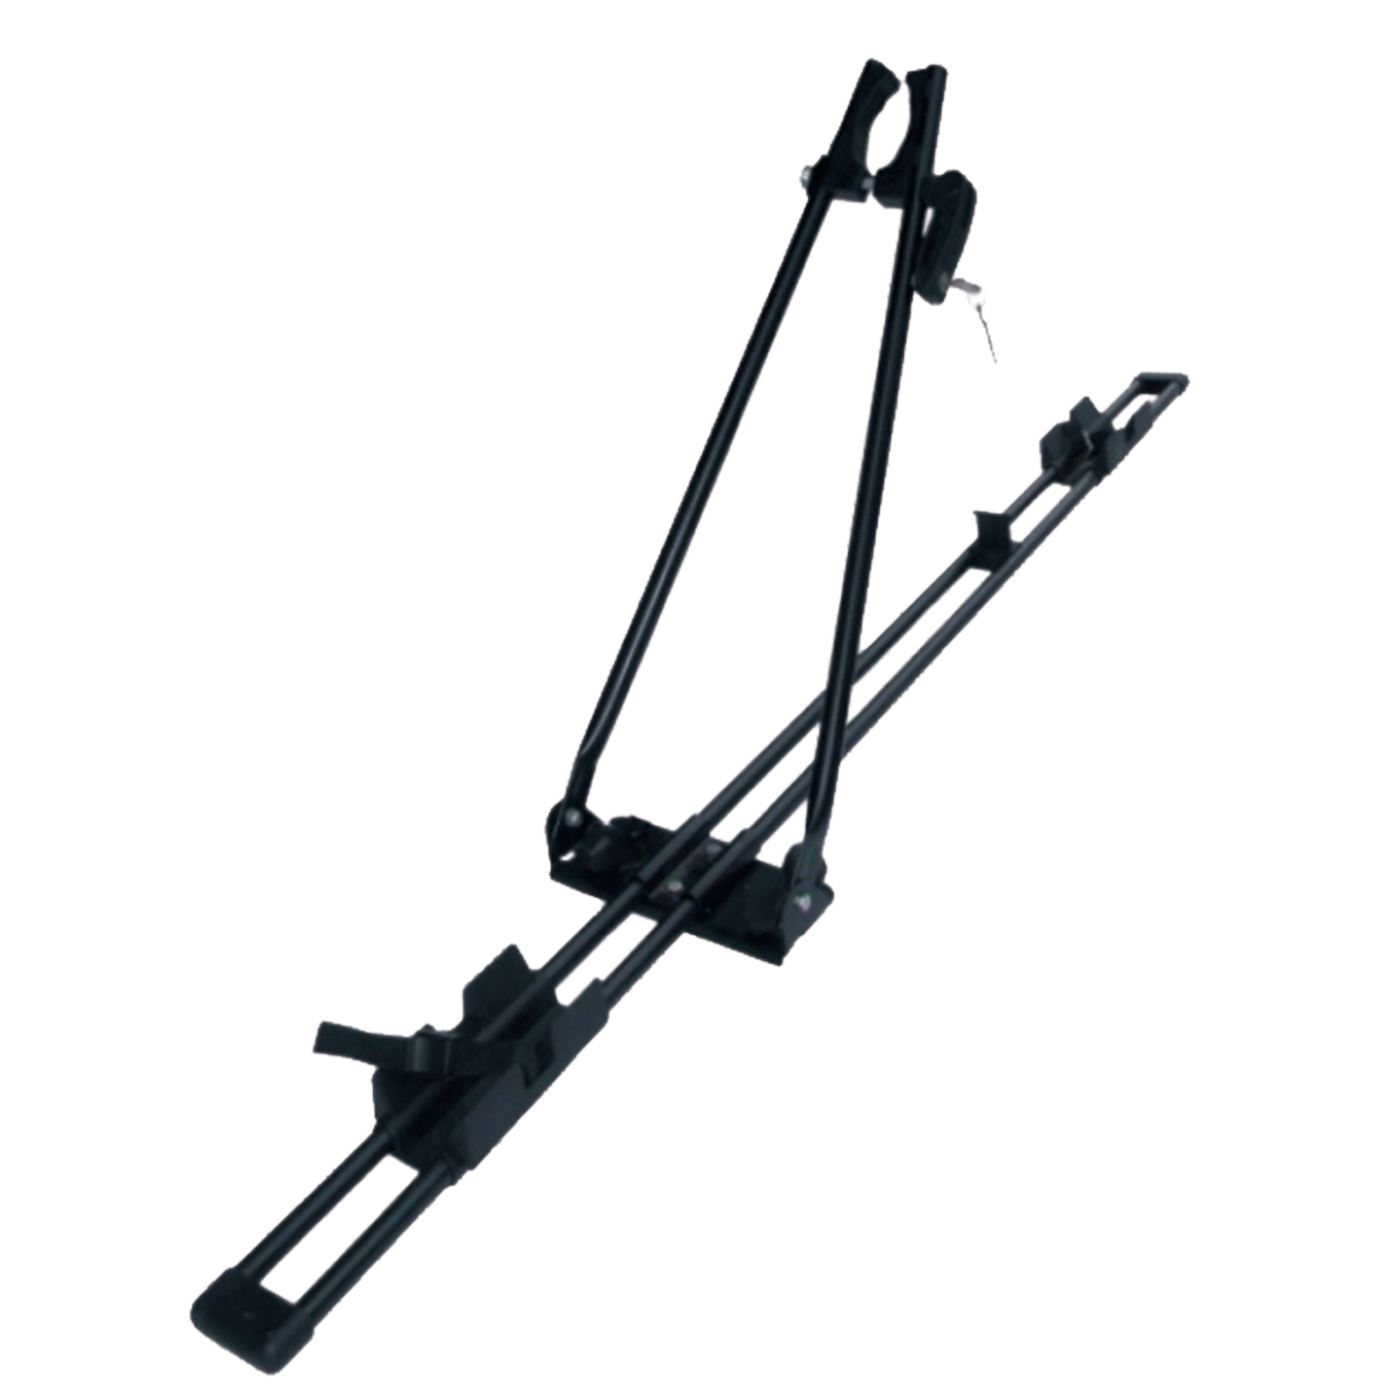 Bike Carrier Universal QEE for top of car